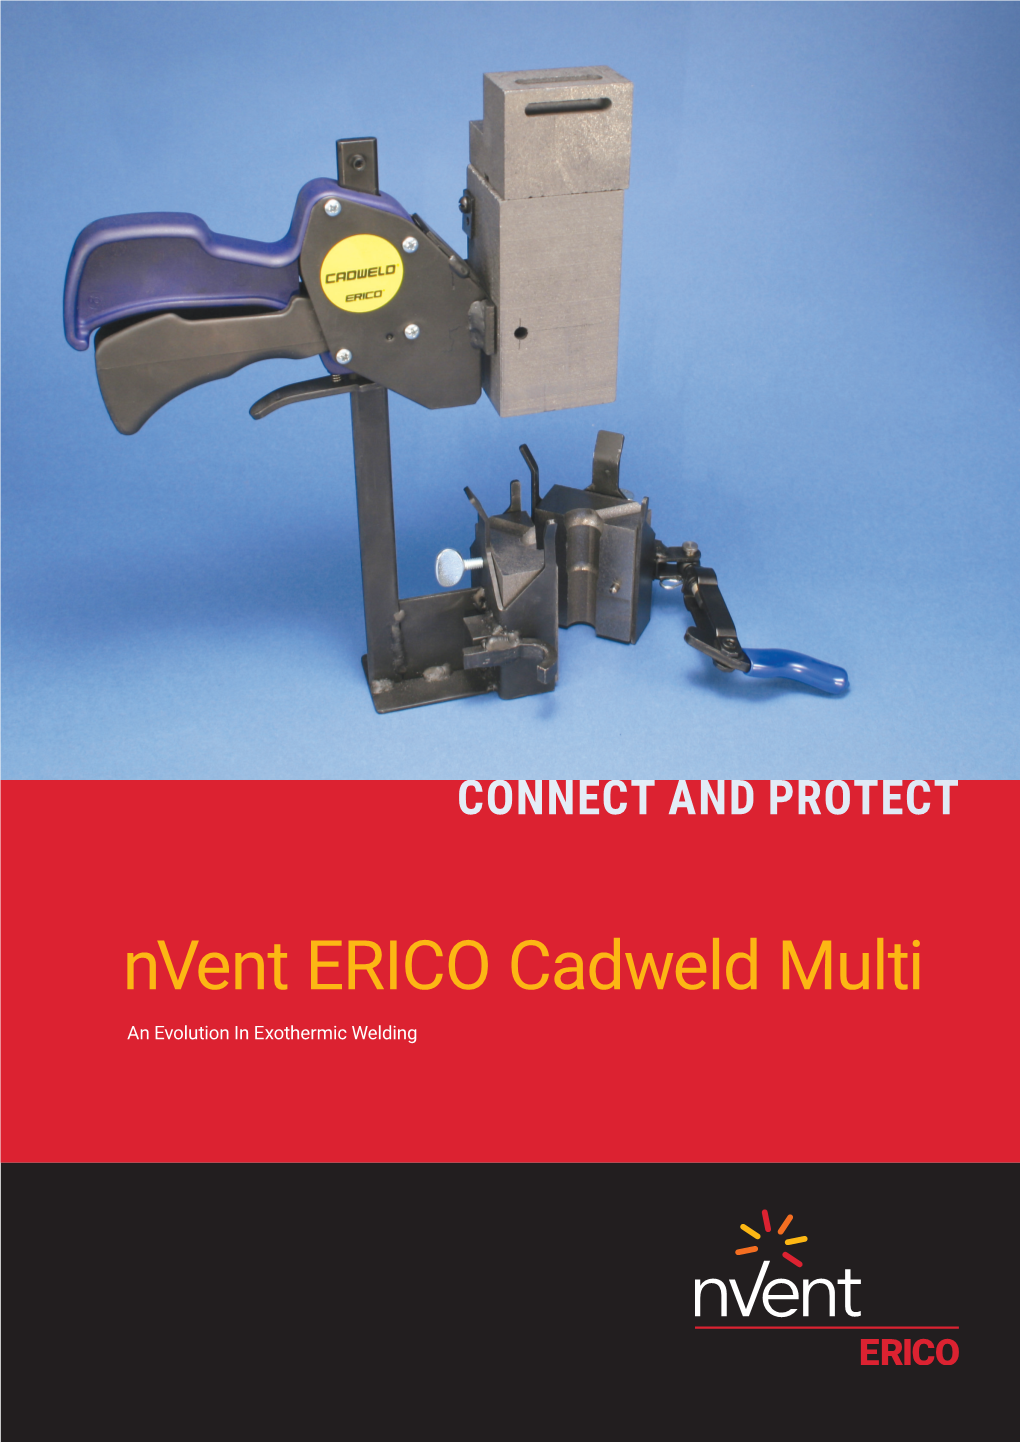 Nvent ERICO Cadweld Multi an Evolution in Exothermic Welding Cadweld Multi